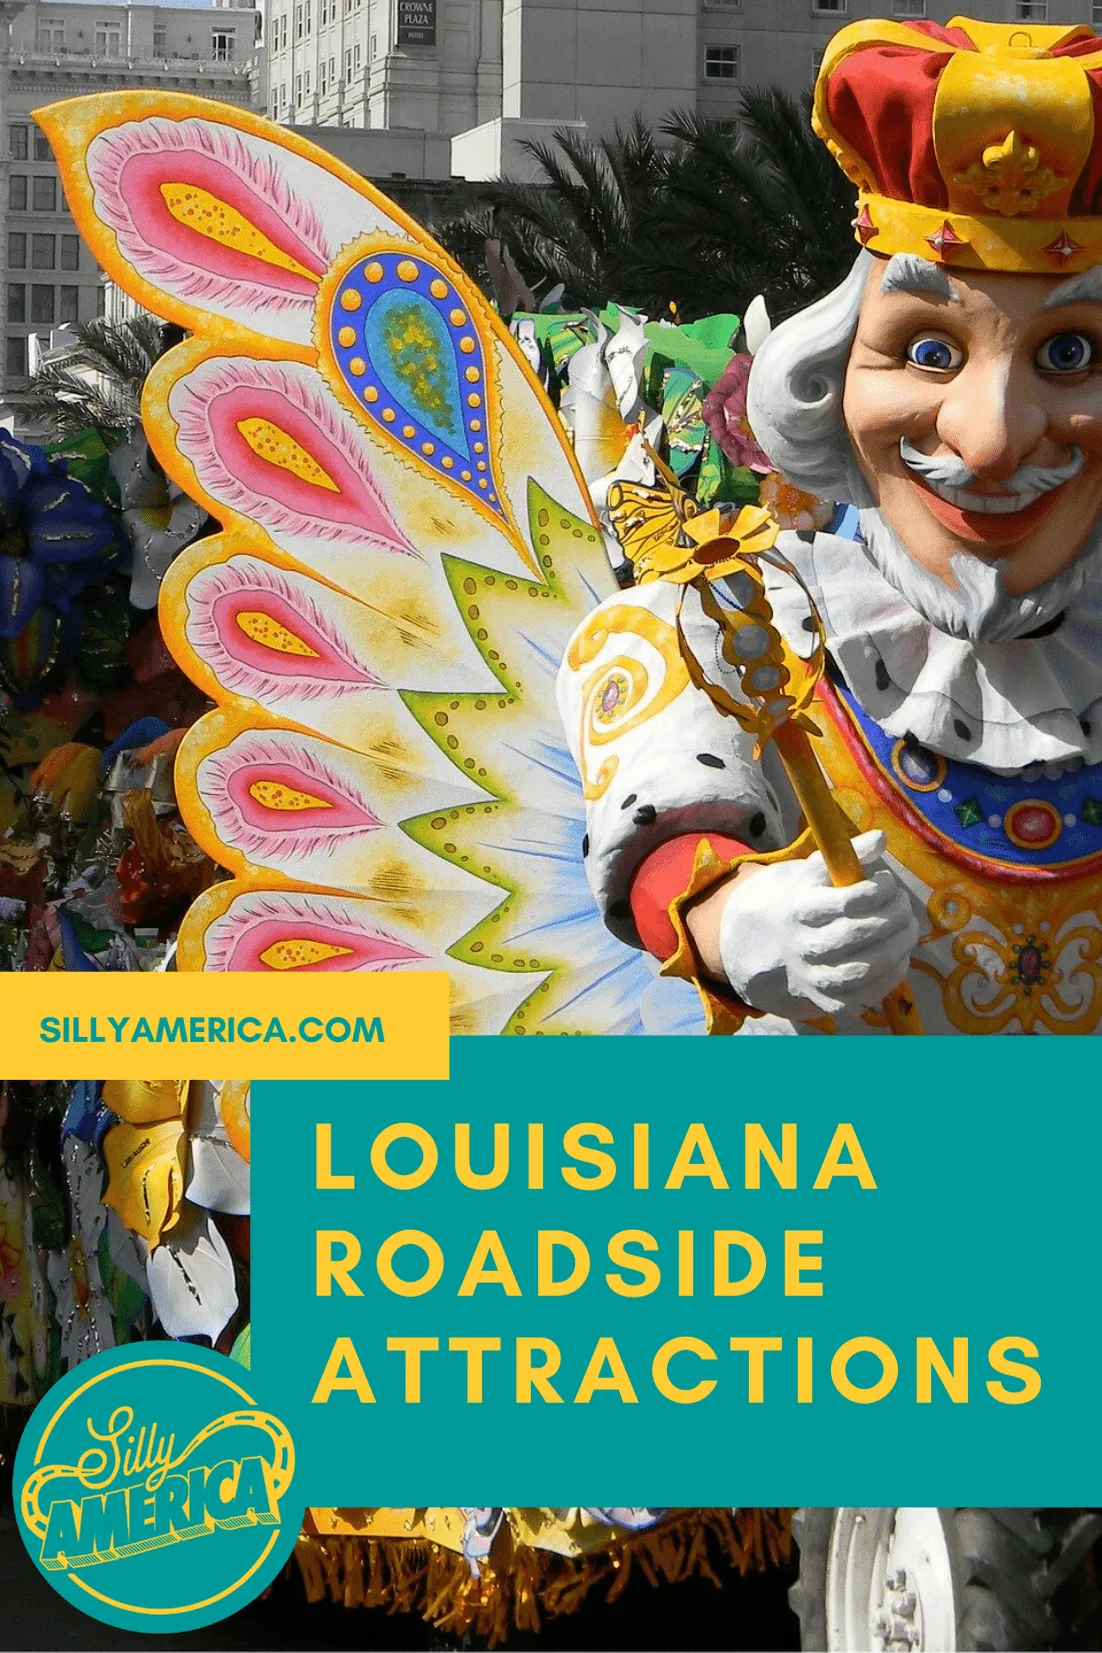 The best Louisiana roadside attractions to visit on a Louisiana road trip. Add these roadside oddities to your travel bucket list, itinerary, or route map! Fun road trip stops for kids or adults heading to New Orleans, Baton Rouge, or more. #LouisianaRoadsideAttractions #LouisianaRoadsideAttraction #RoadsideAttractions #RoadsideAttraction #RoadTrip #LouisianaRoadTrip #LouisianaRoadTripMap #ThingsToDoInLouisiana #LouisianaRoadTripIdeas #NewOrleansRoadTrip